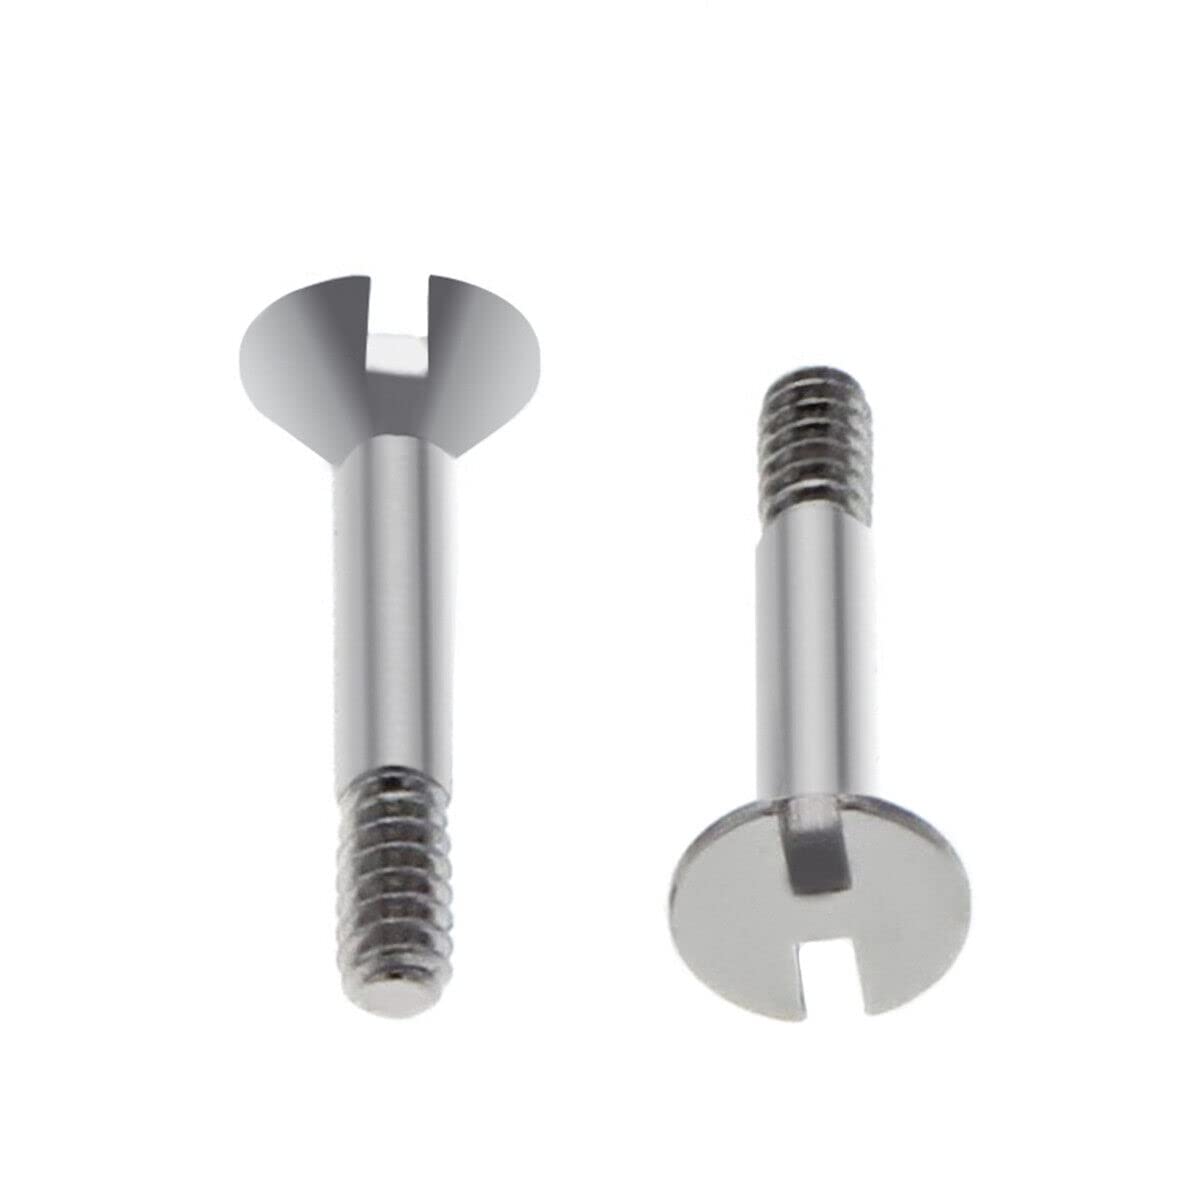 Ewatchparts 7MM LONG H SCREW COMPATIBLE WITH 48MM BIG BANG KING POWER CERAMIC FUSION STRAP BAND